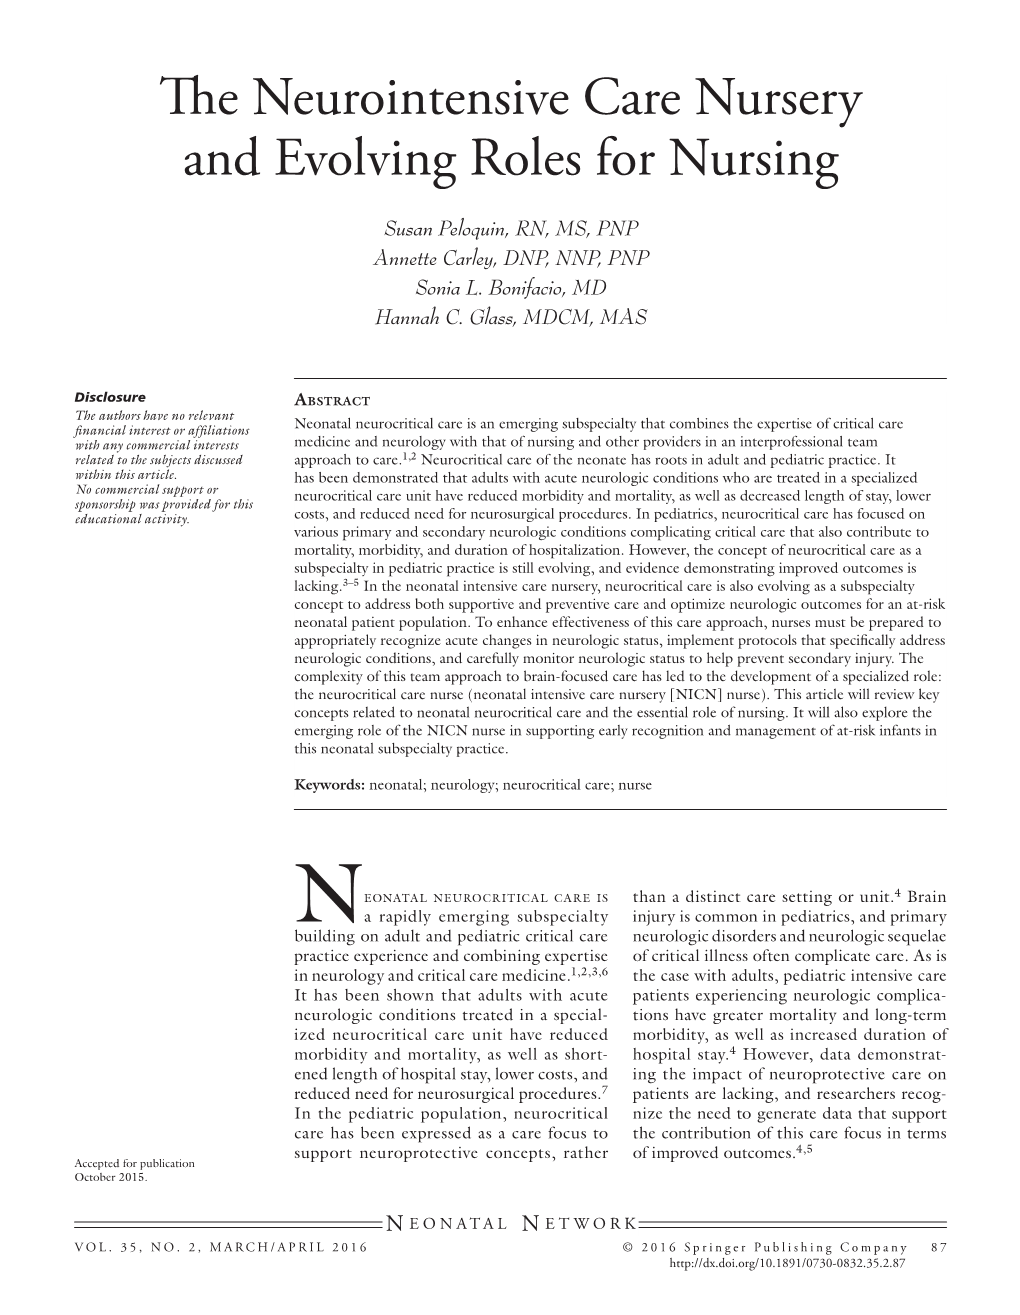 The Neurointensive Care Nursery and Evolving Roles for Nursing